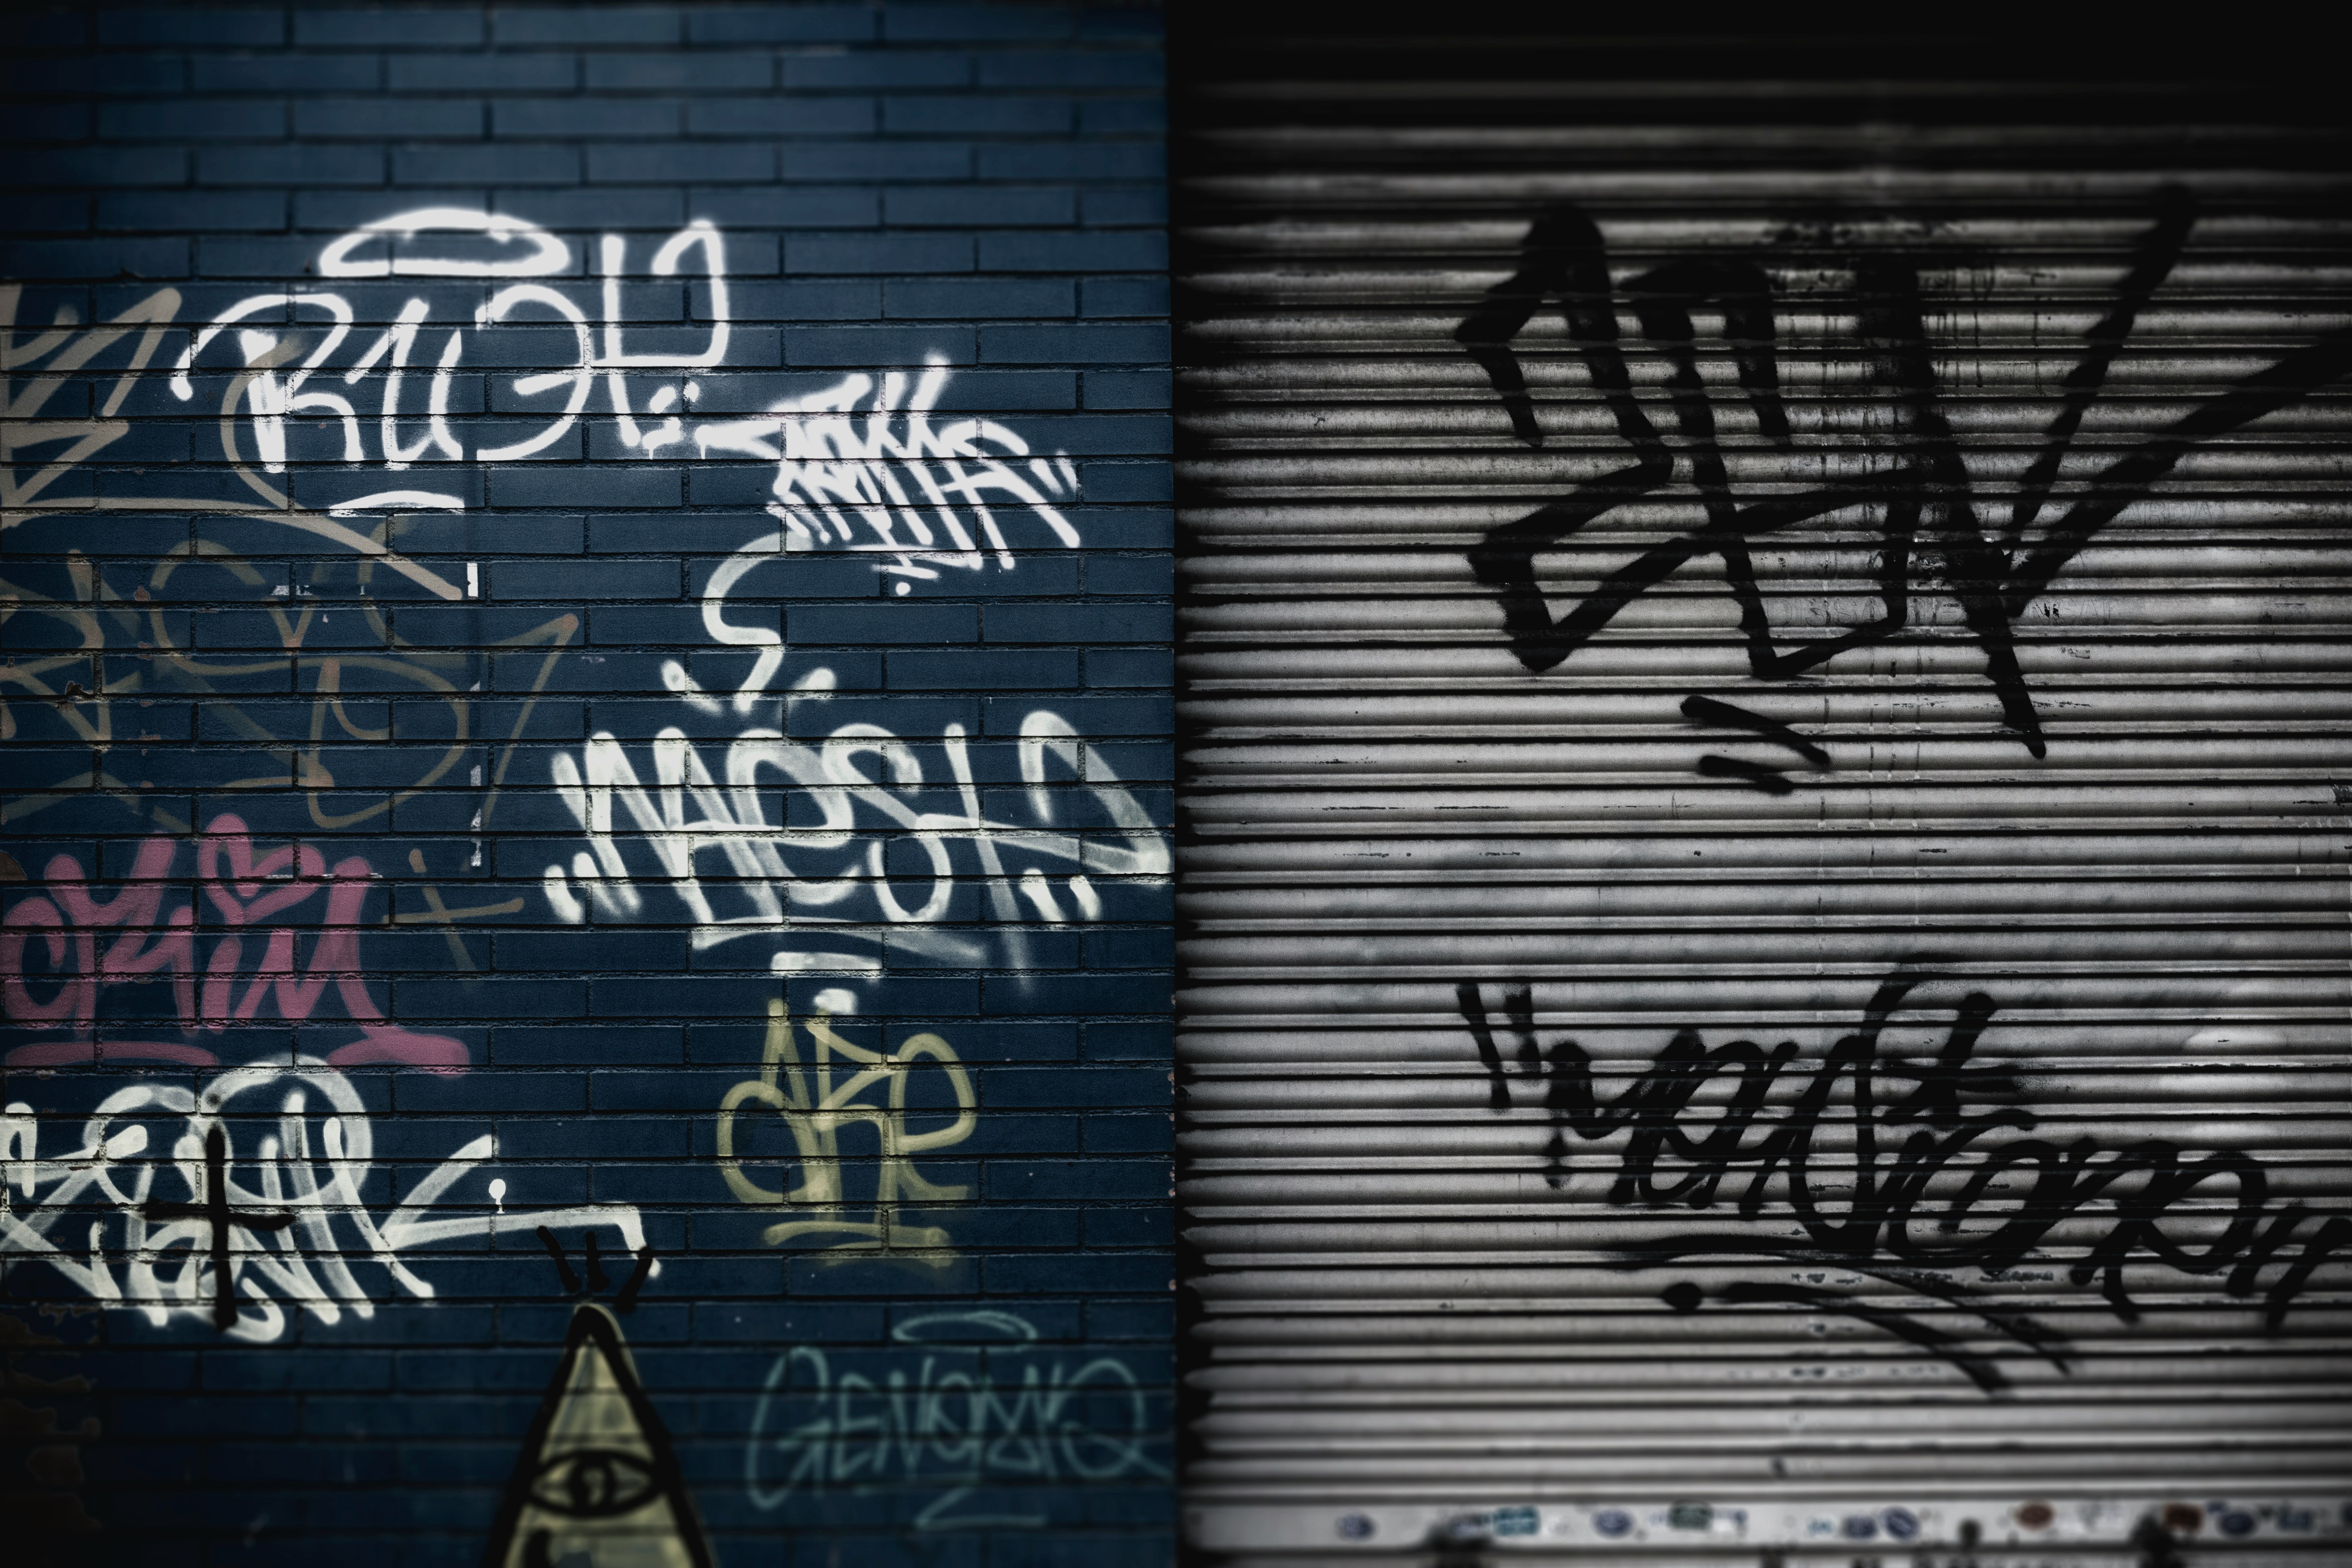 Example of a Tags style graffiti